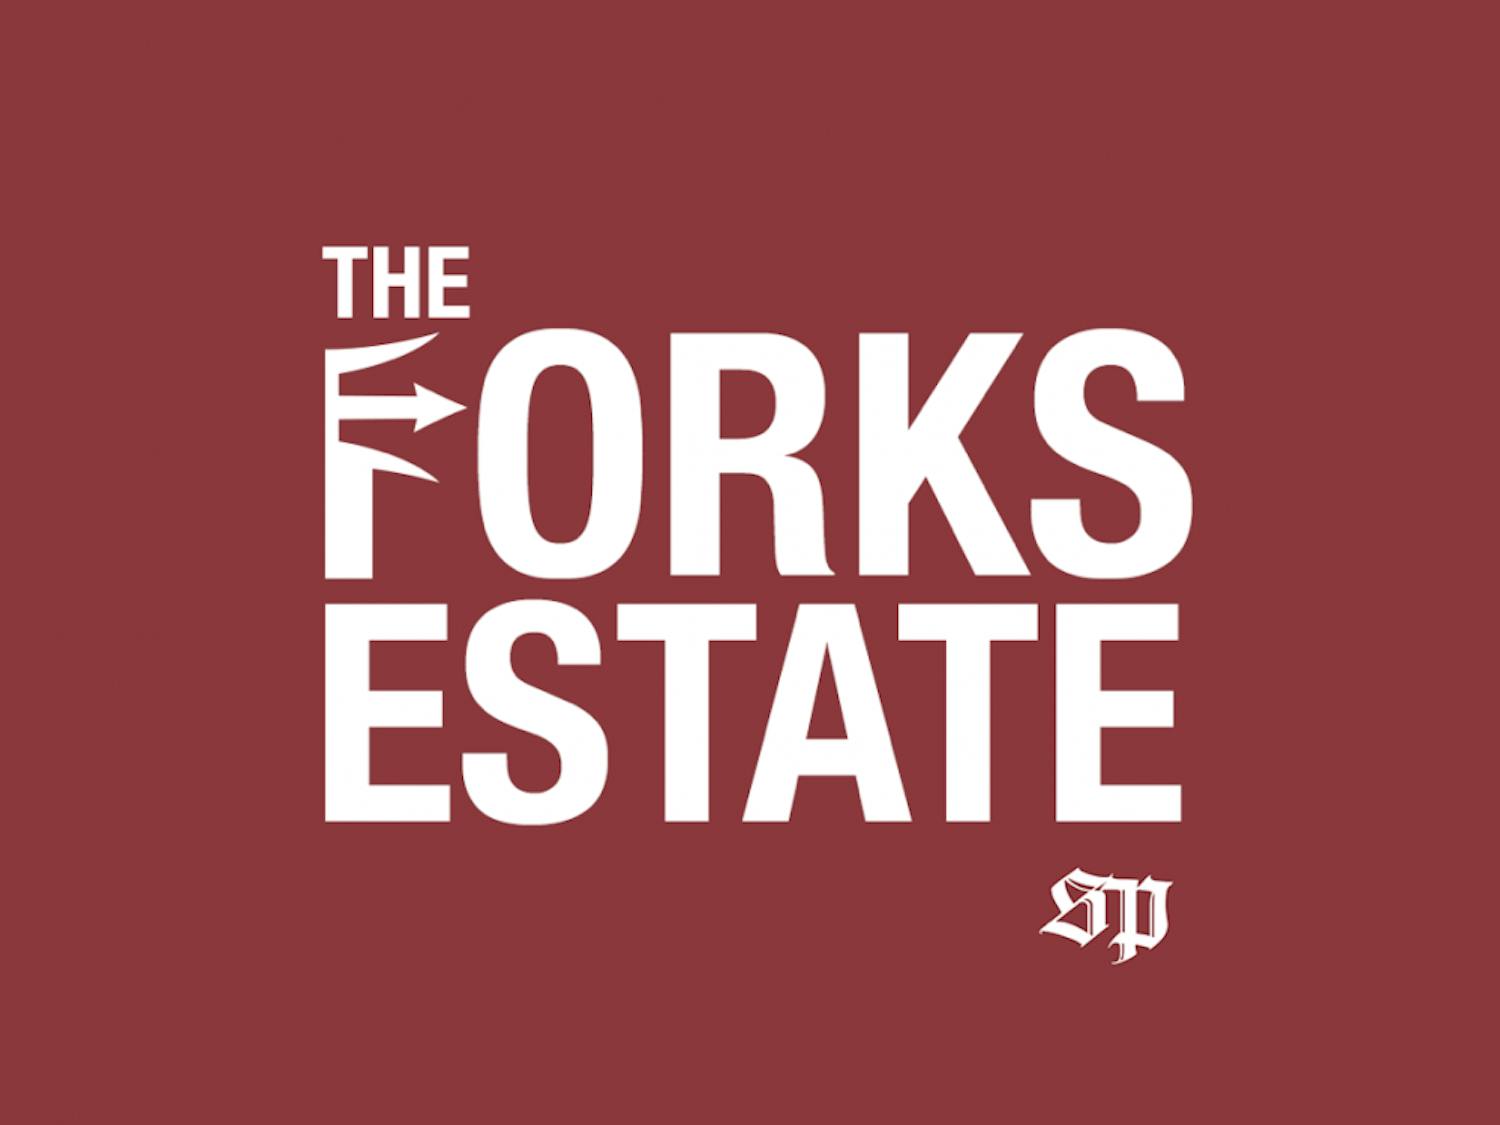 The Forks Estate is a politics podcast. Graphic designed by Chuck Dries.&nbsp;&nbsp;